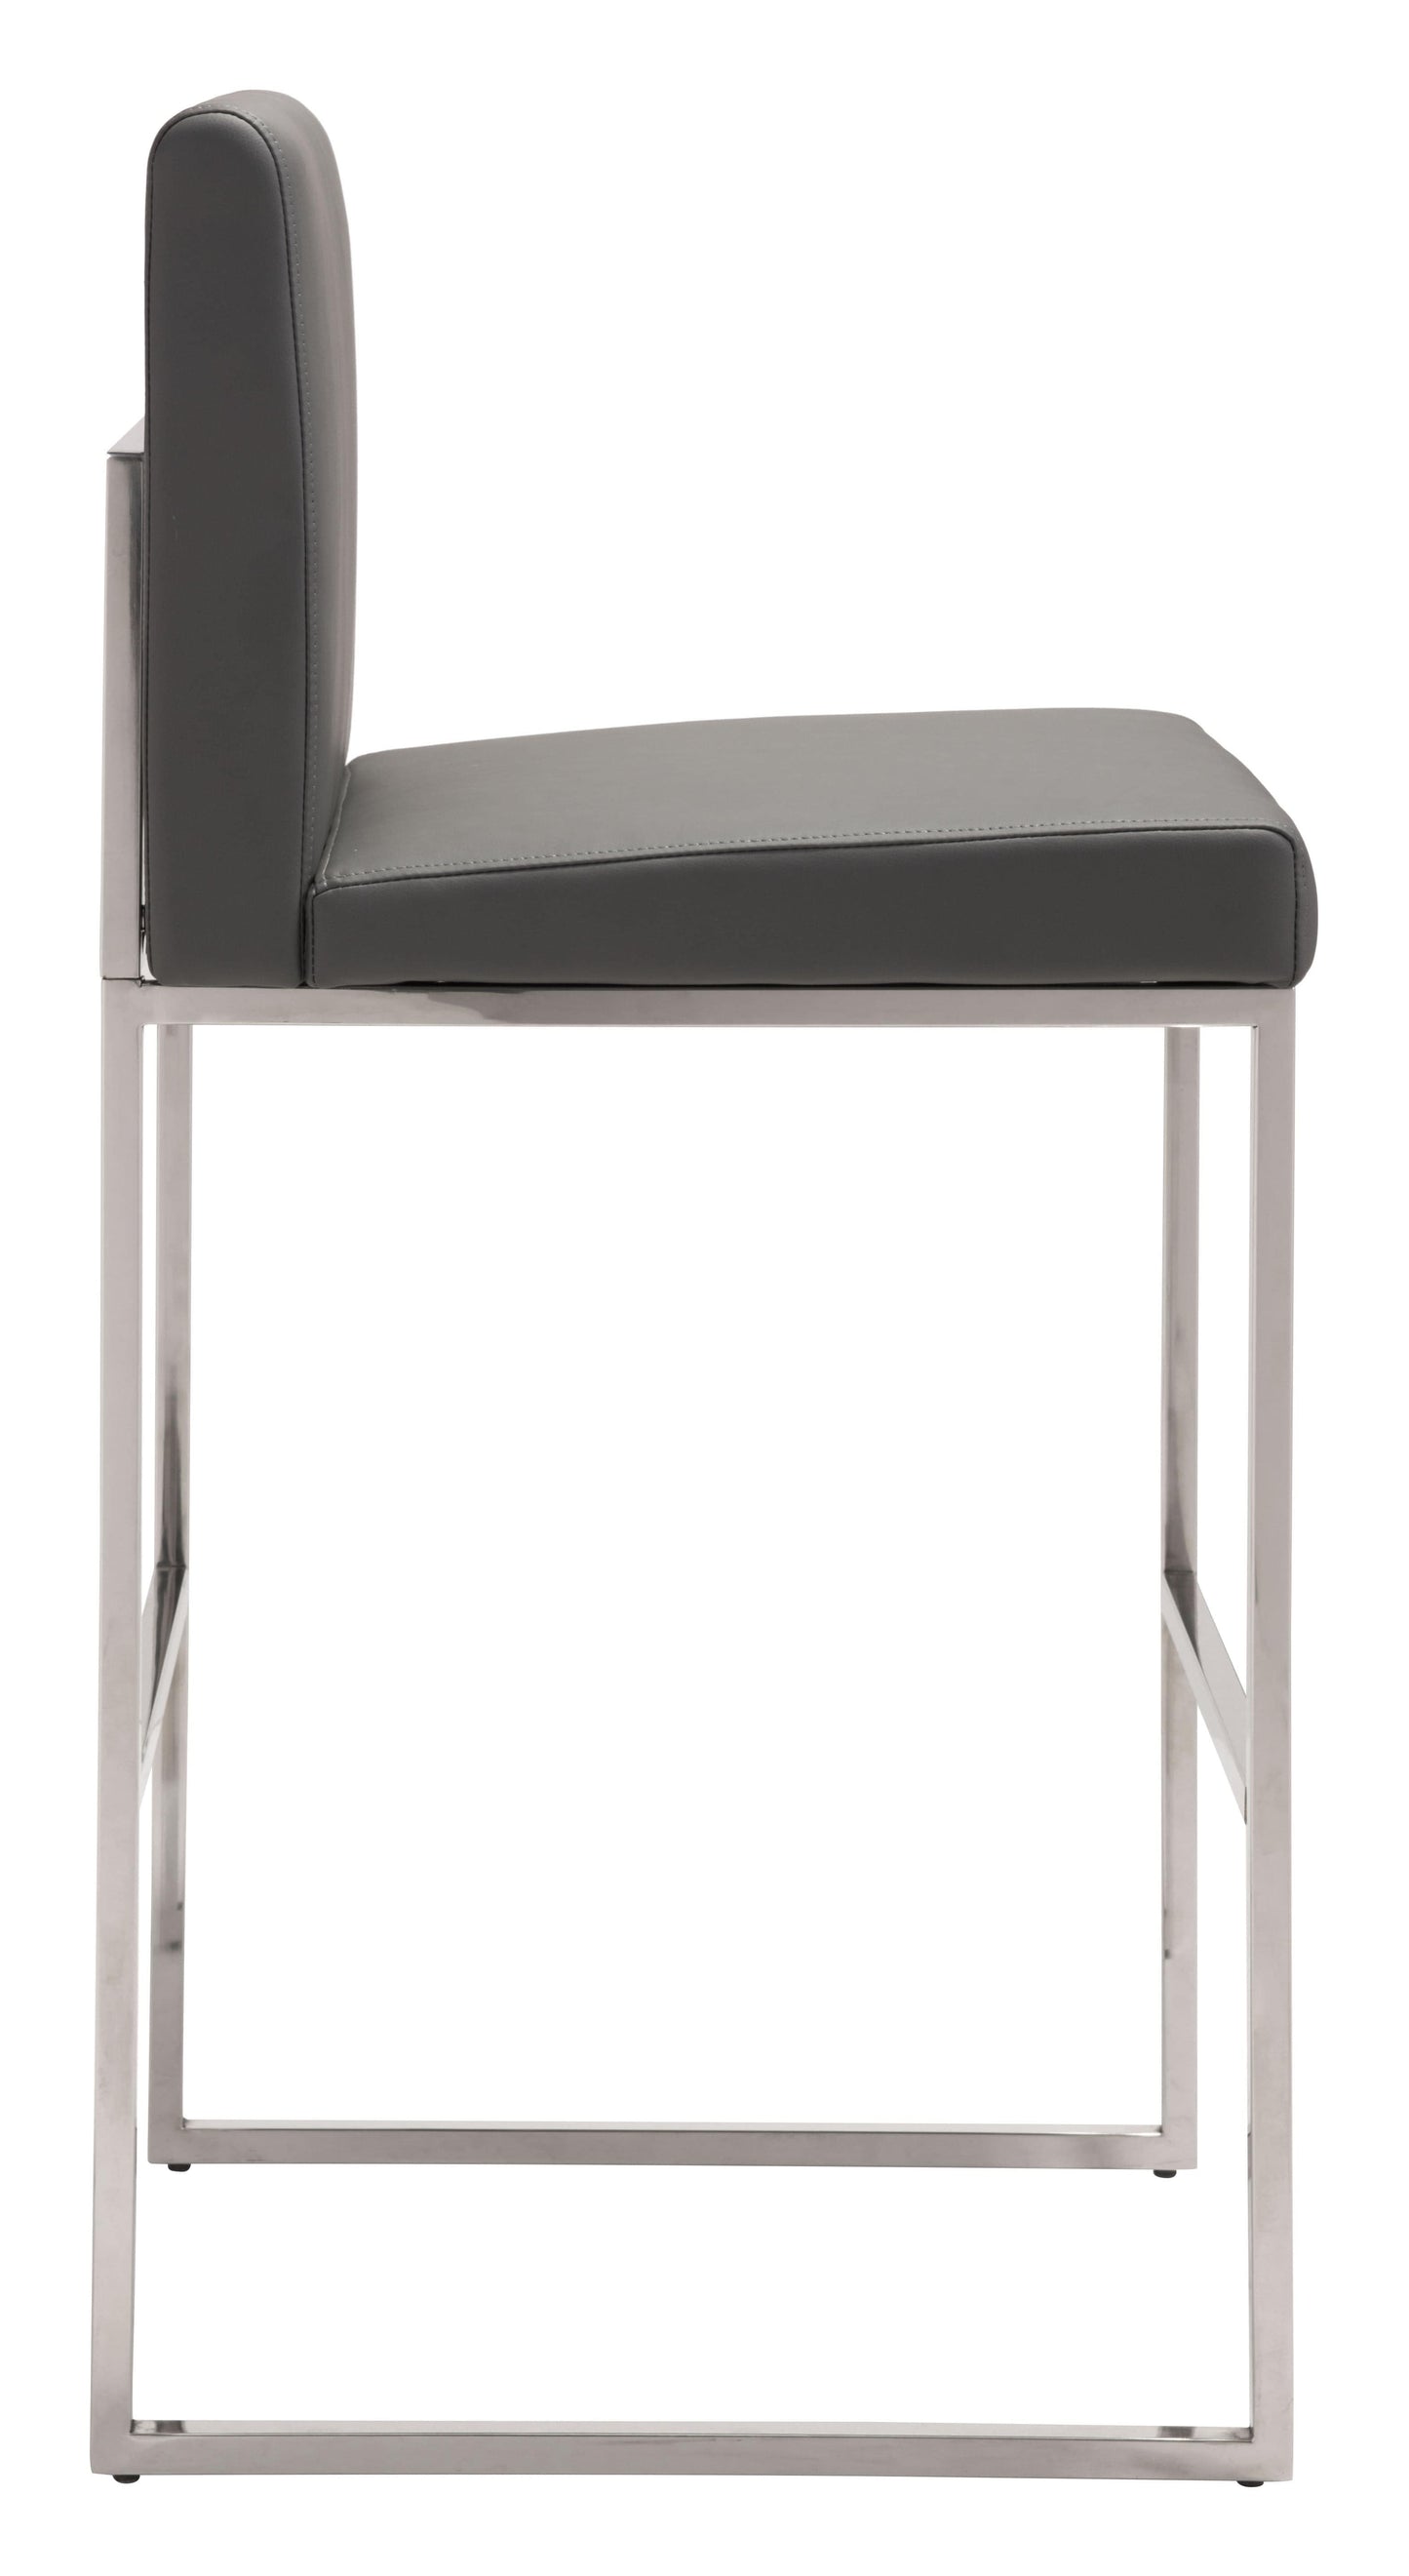 Side view of modern bar chair